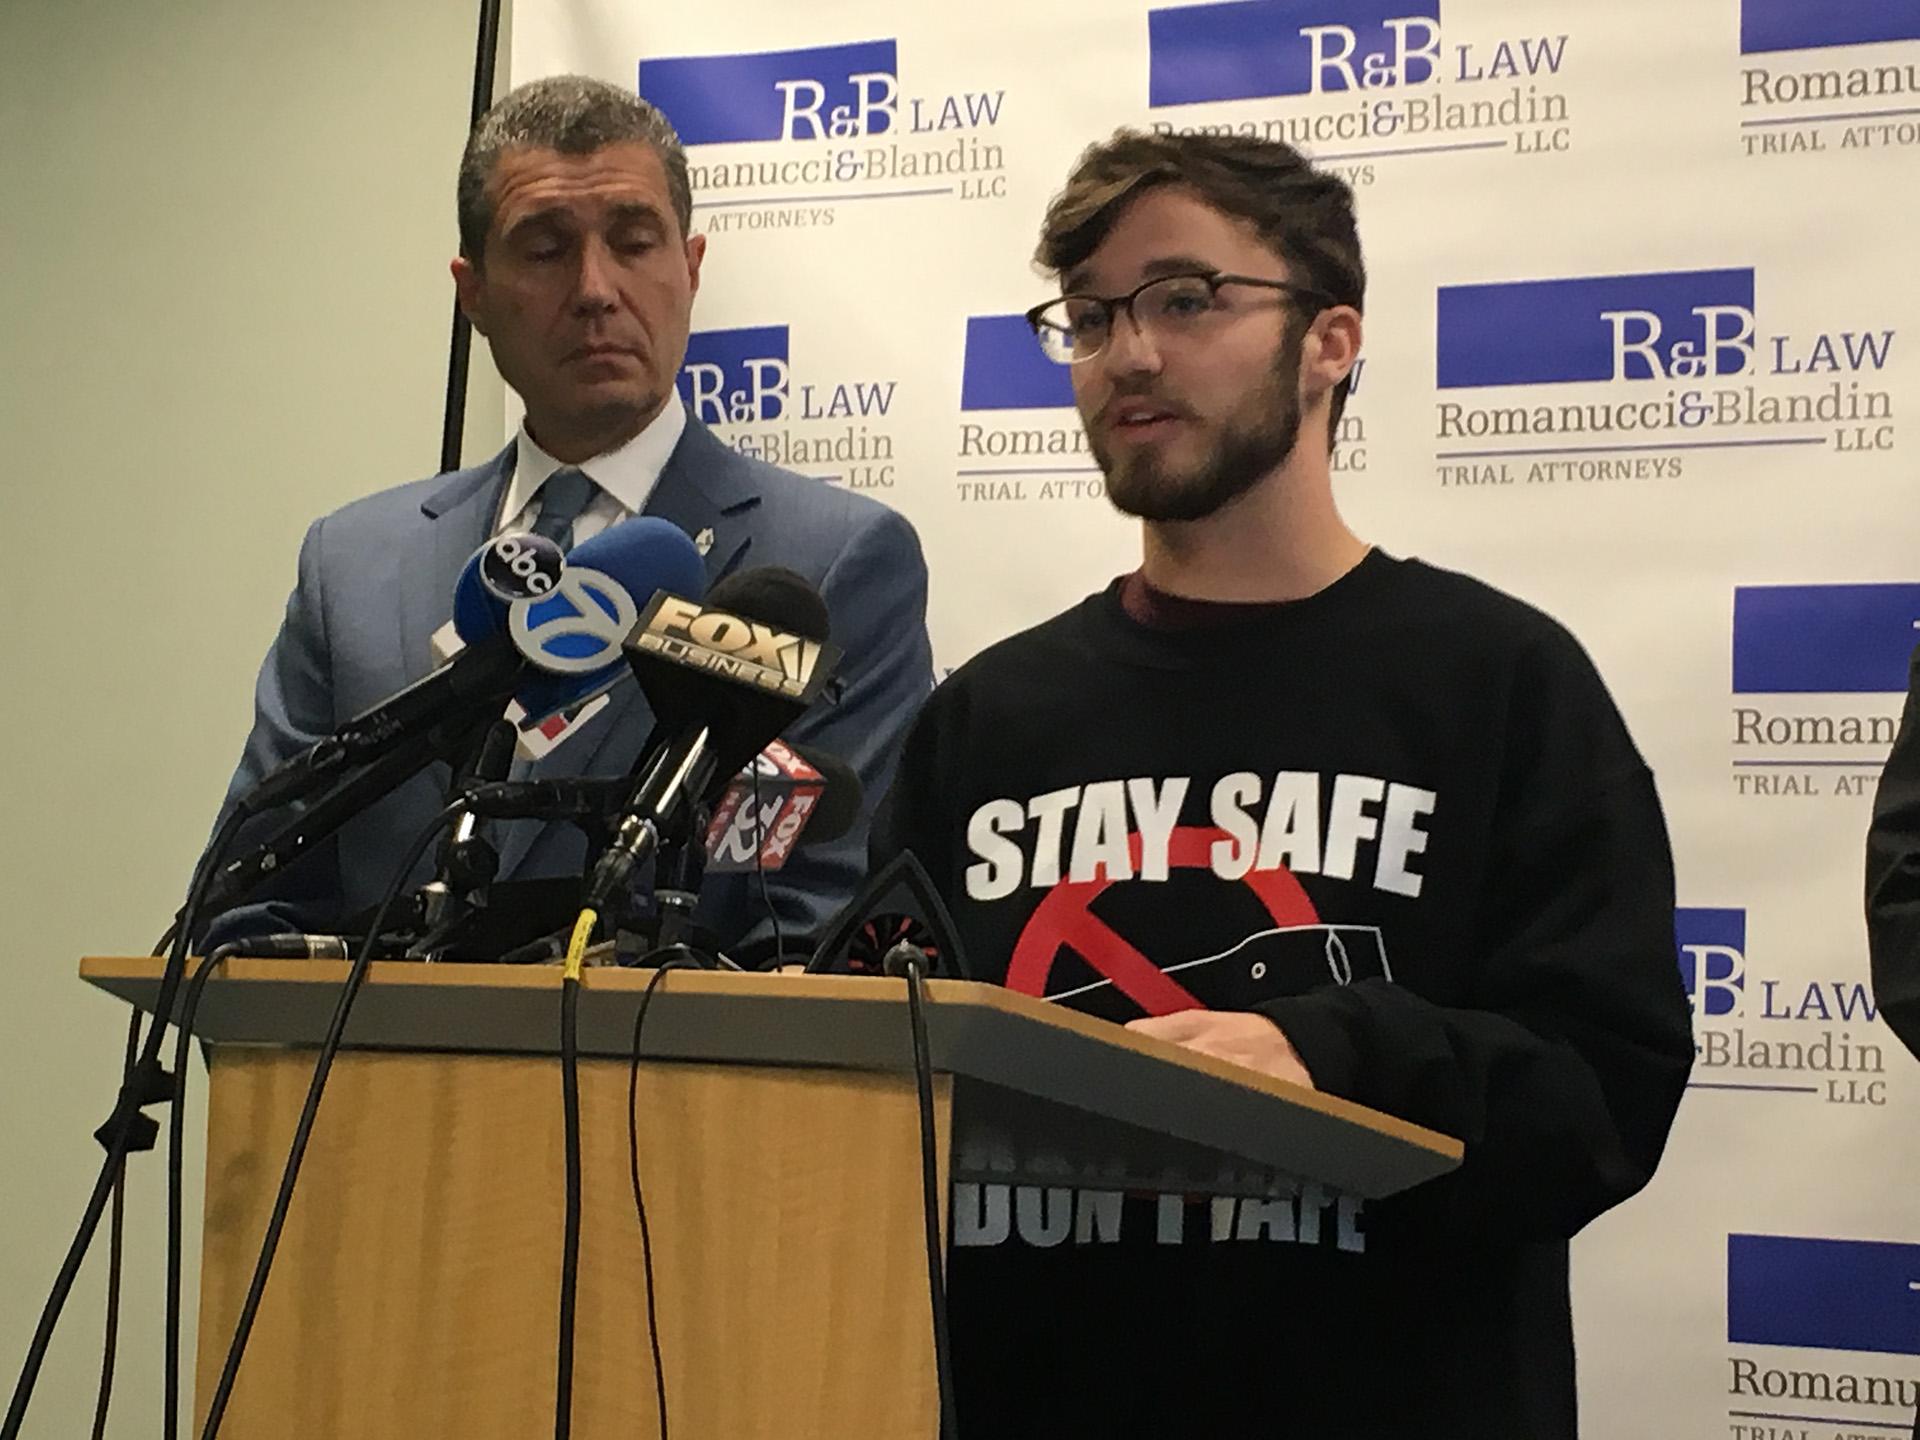 Gurnee resident Adam Hergenreder, 18, right, talks about how he began using e-cigarettes at a Friday, Sept. 13 press conference alongside his attorney Antonio Romanucci. (Kristen Thometz / WTTW News)